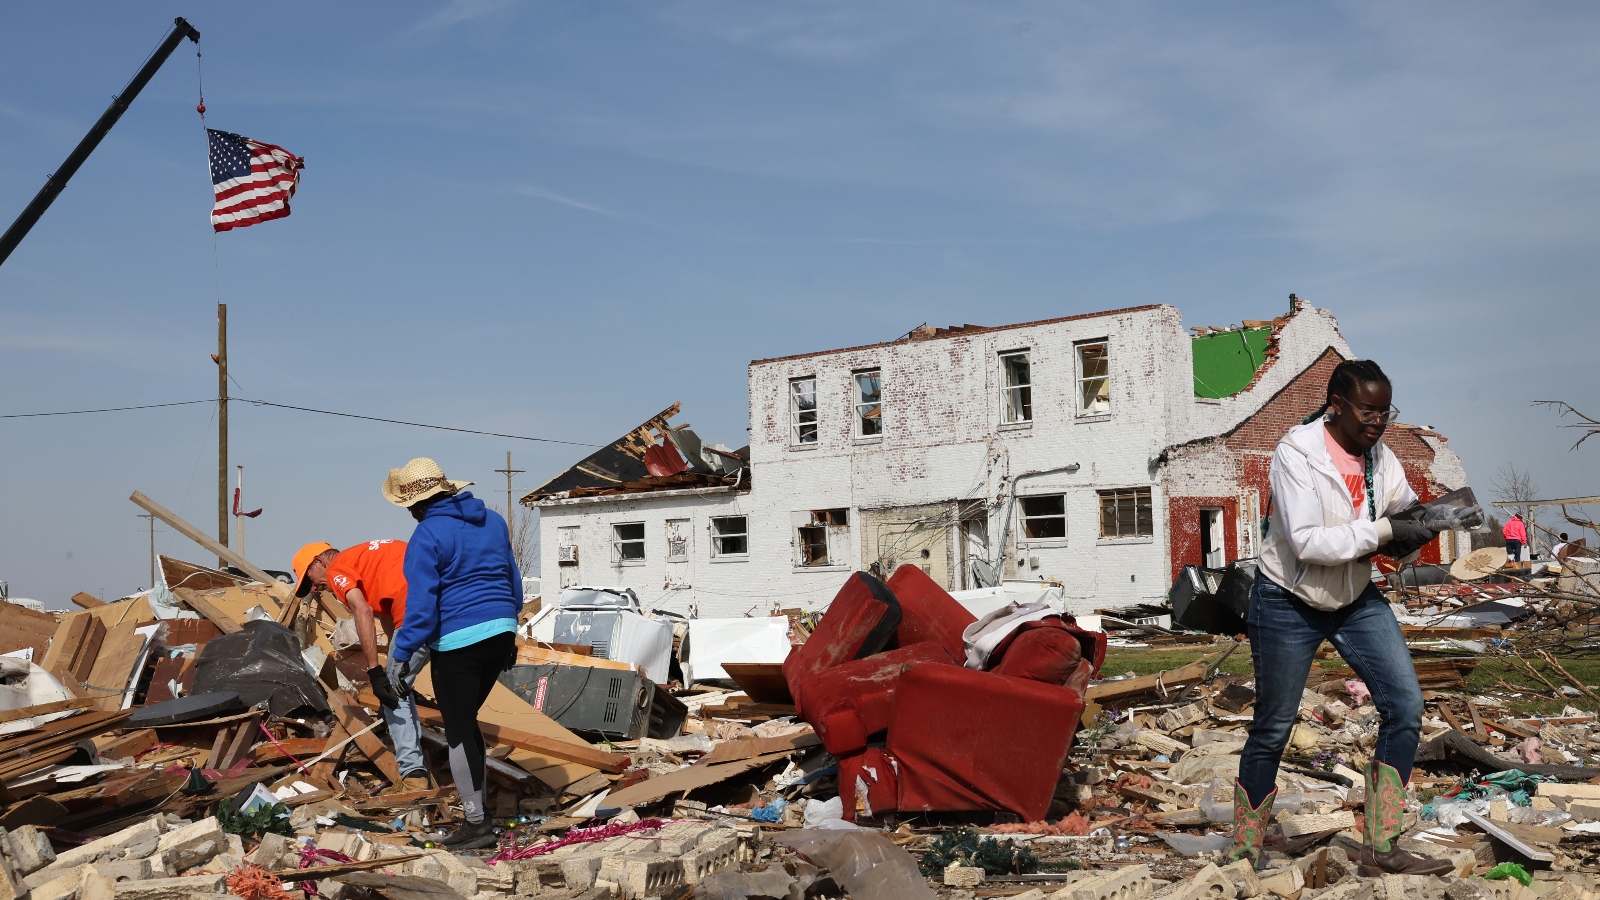 Residents and volunteers work to salvage possessions among the rubble of homes in the aftermath of a tornado that struck Rolling Fork, Mississippi on March 24, 2023.